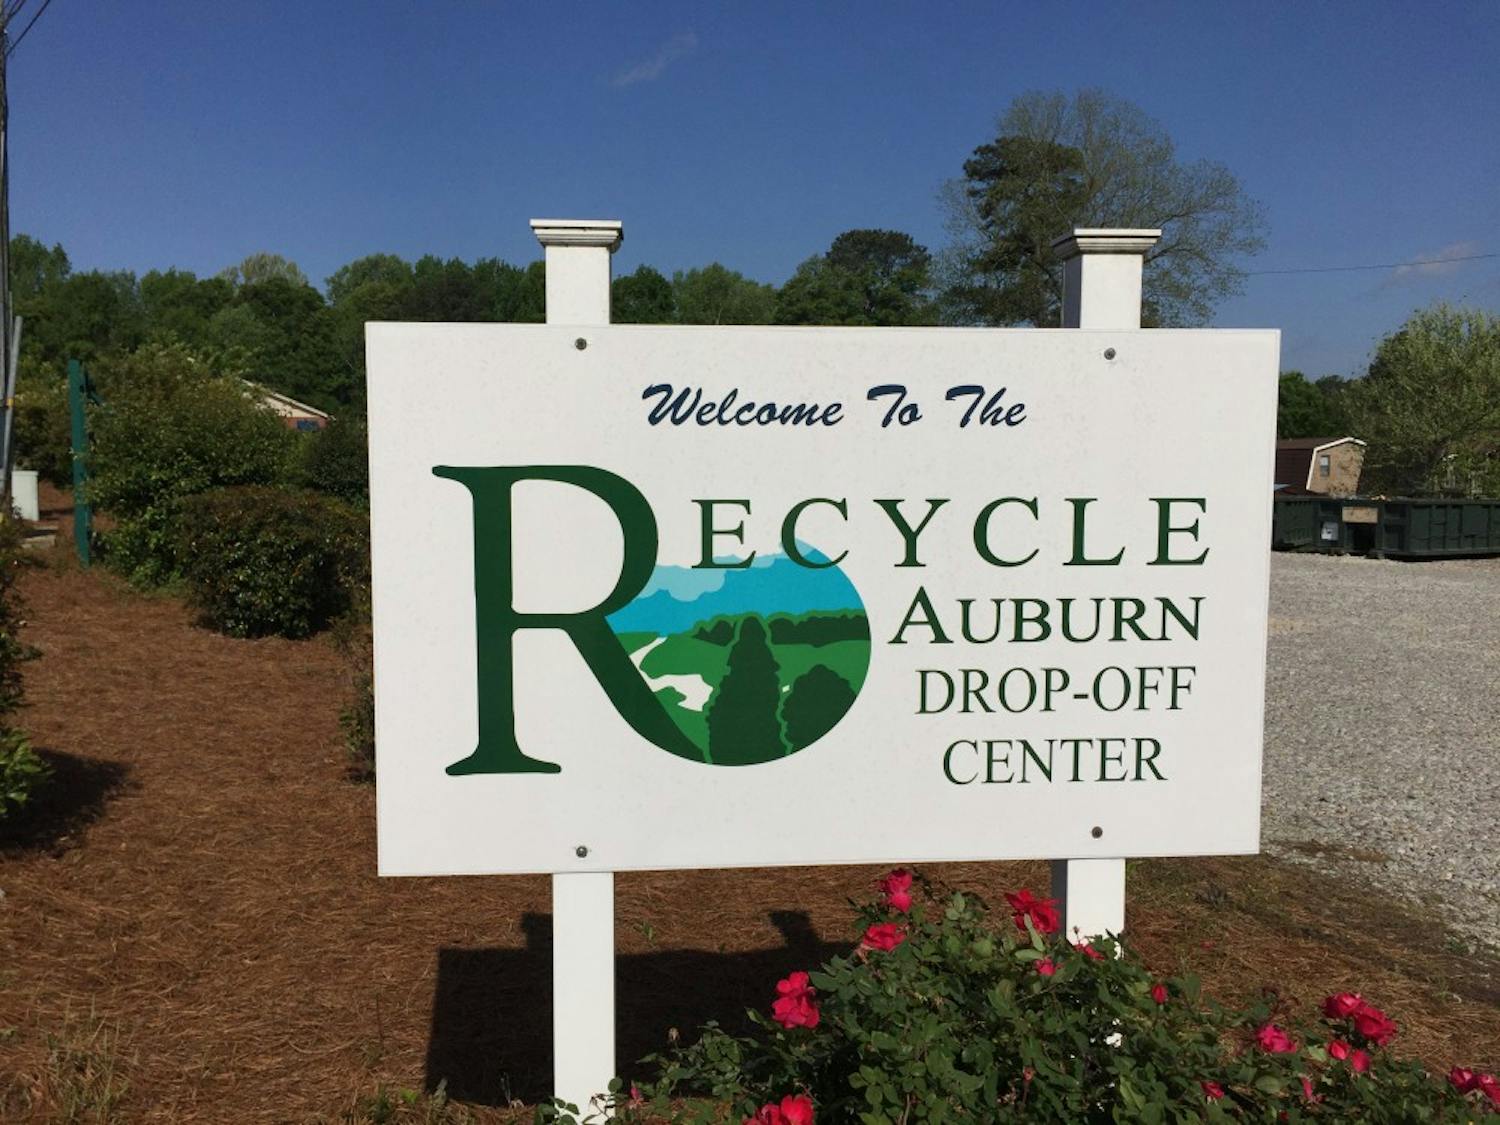 The welcome sign for the Auburn Recycle Center at the Auburn Environmental Services Department's Hazardous Waste Collection Day on Saturday, April 14, 2018 in Auburn, Ala.